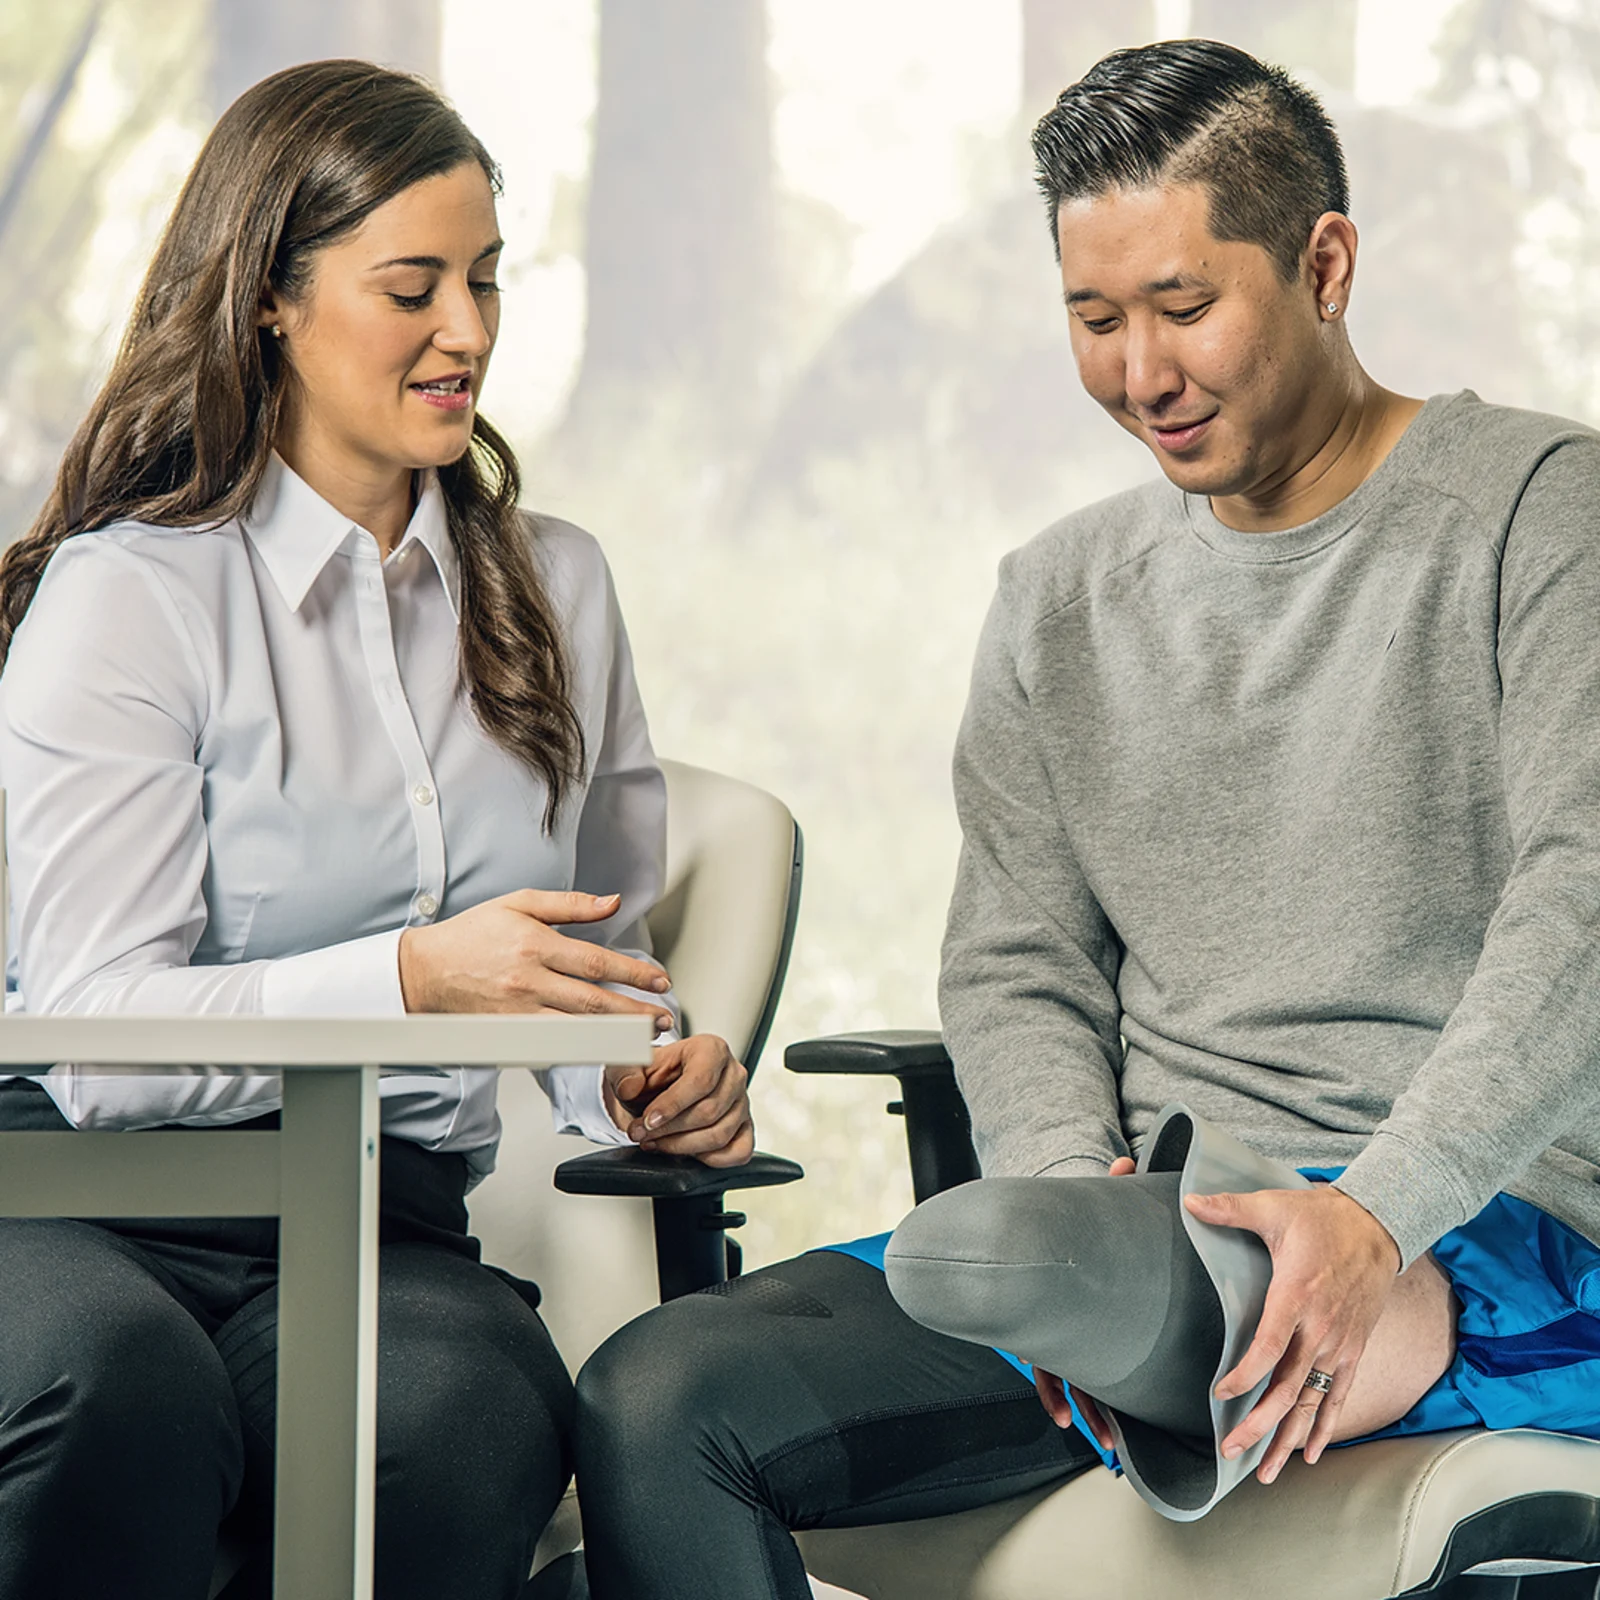 Prosthetist sitting at a table and talking to a leg amputee who shows his residual limb with a liner on